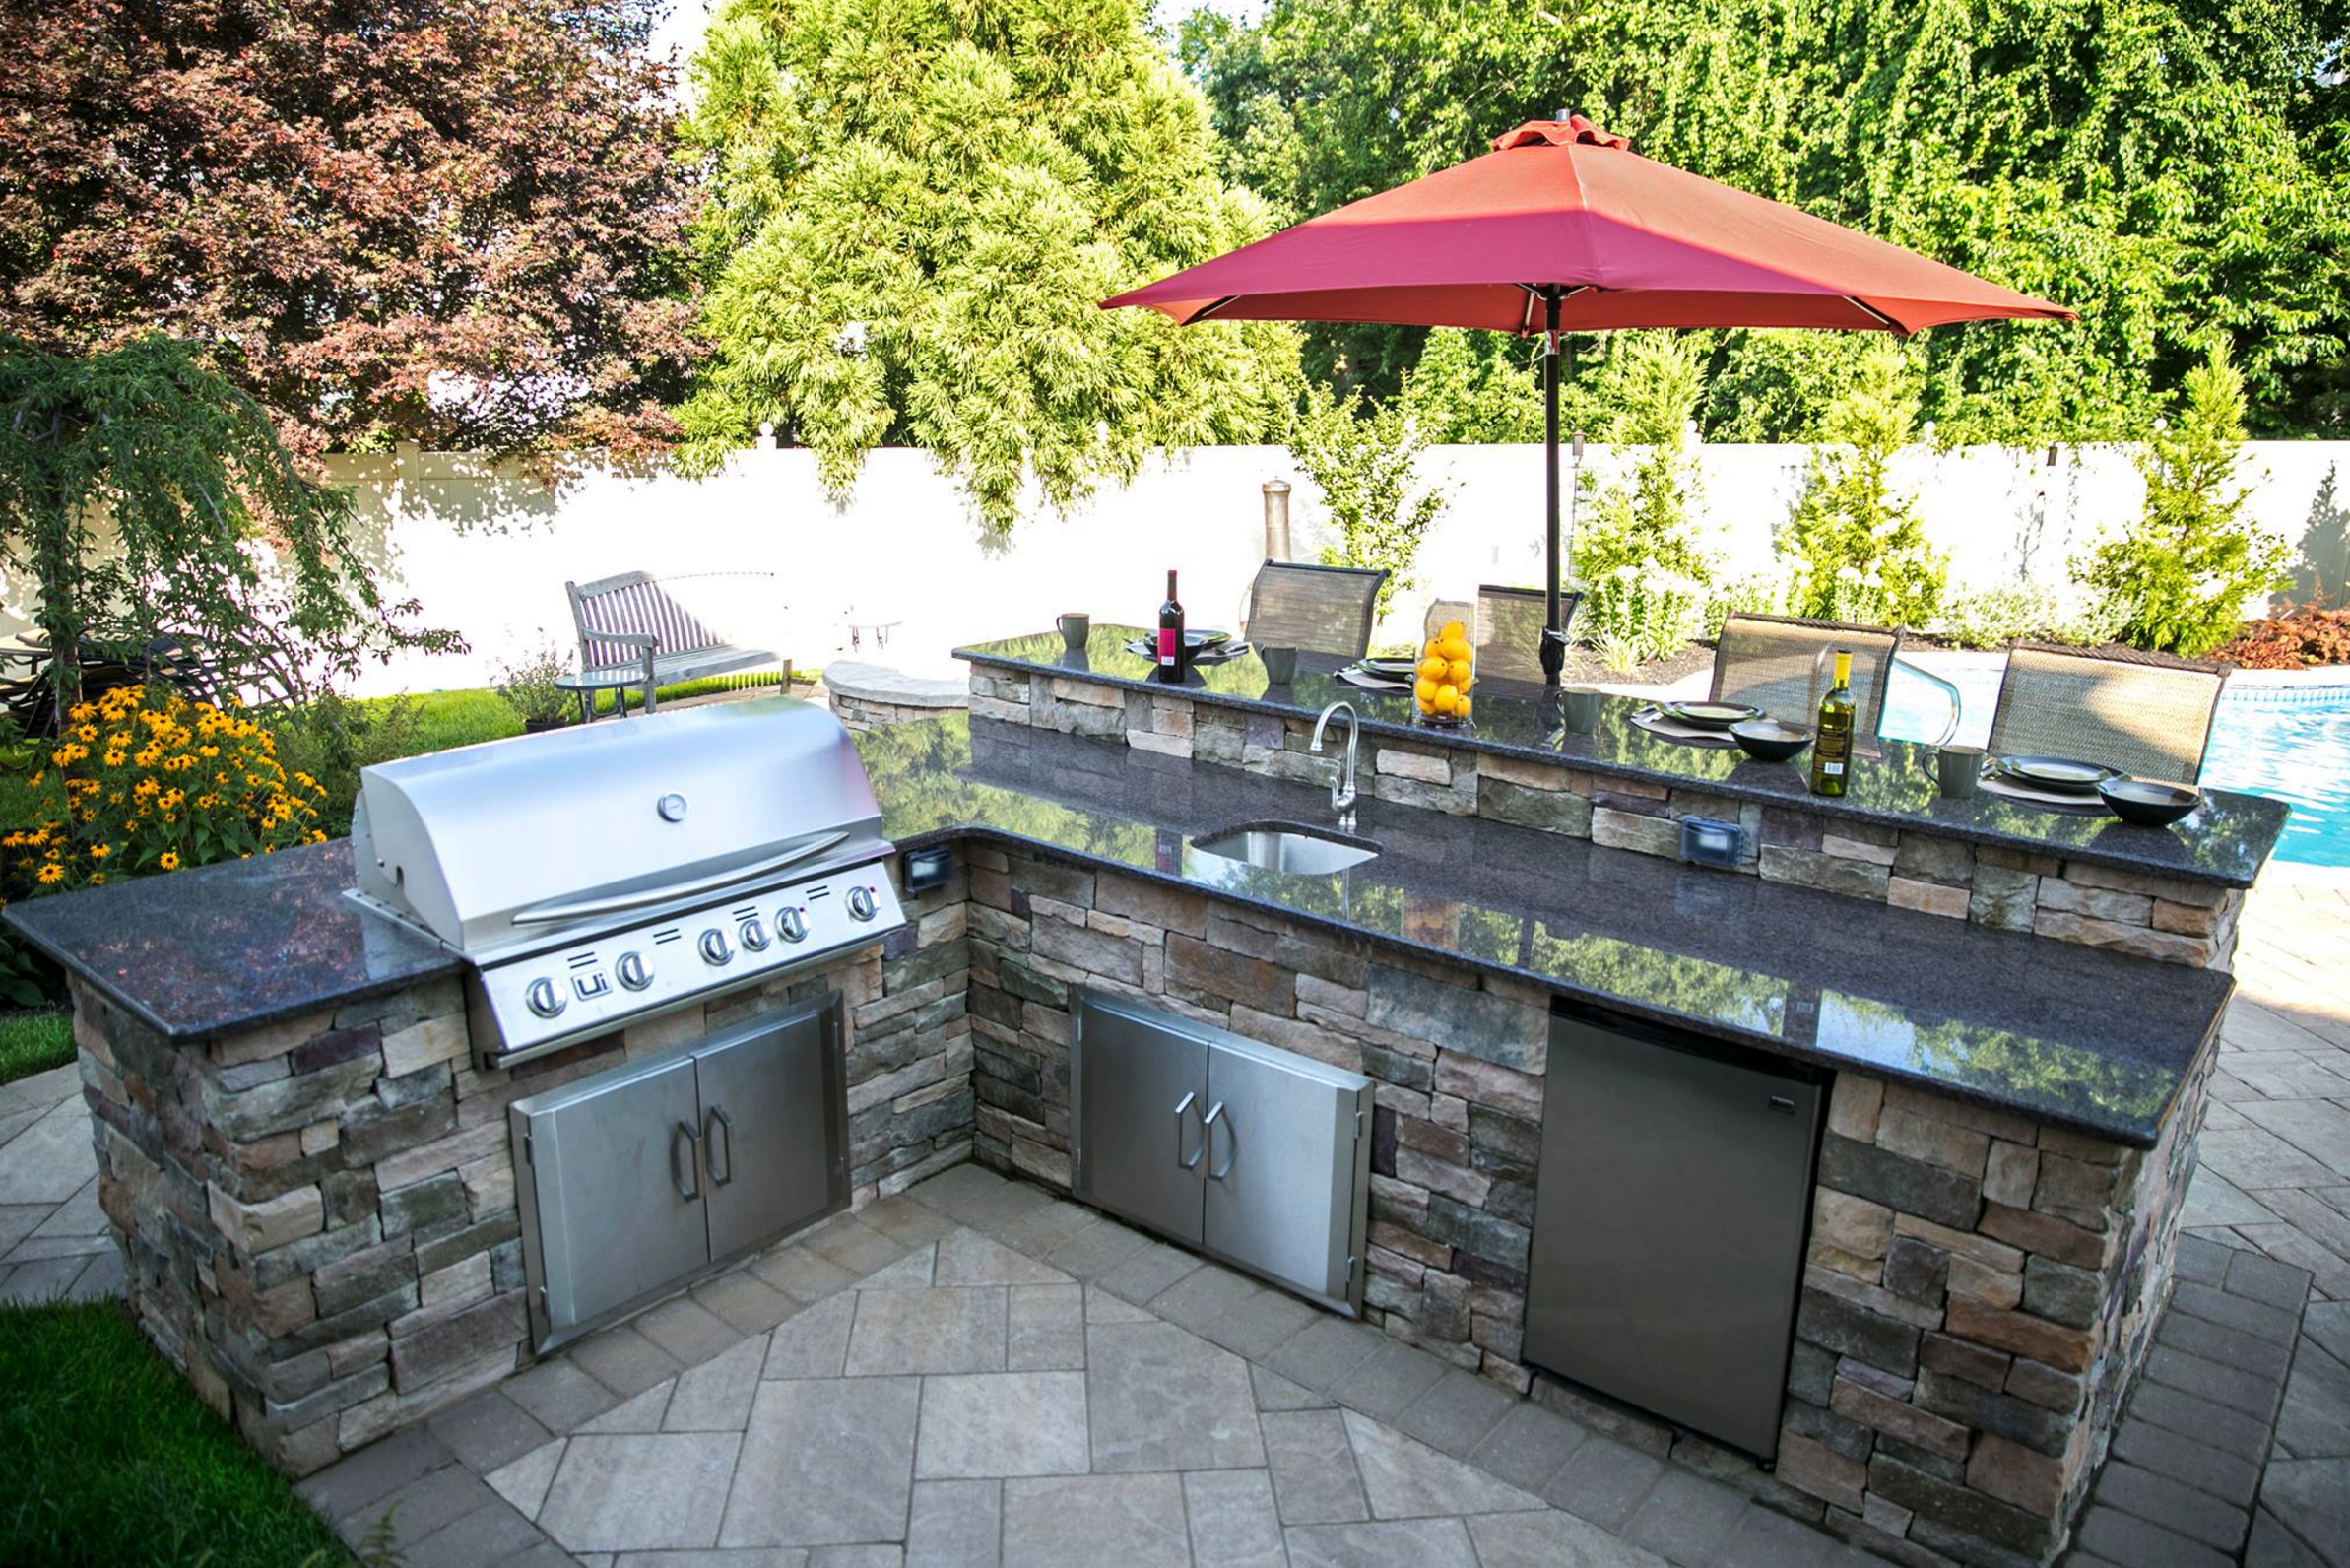  At home relaxation  OUTDOOR KITCHENS IN GLEN COVE, NY    GET STARTED TODAY  